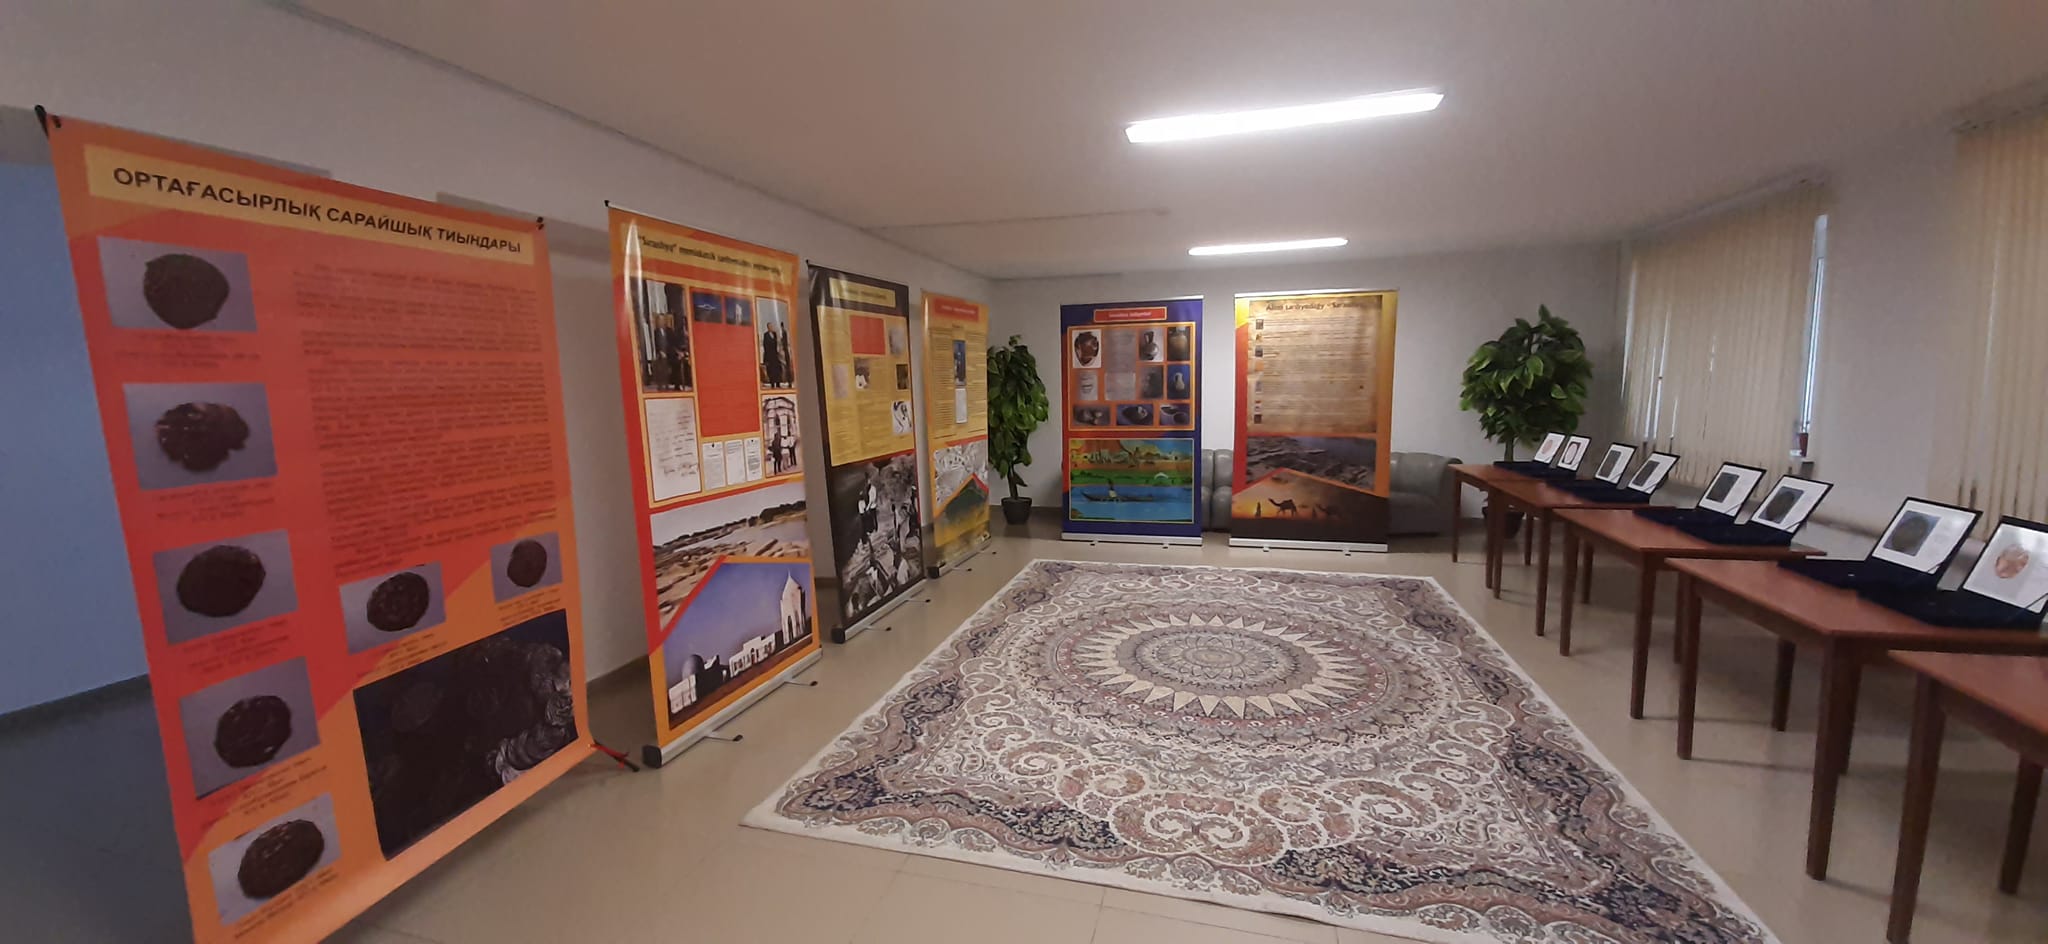 An exhibition was organized in the House of students